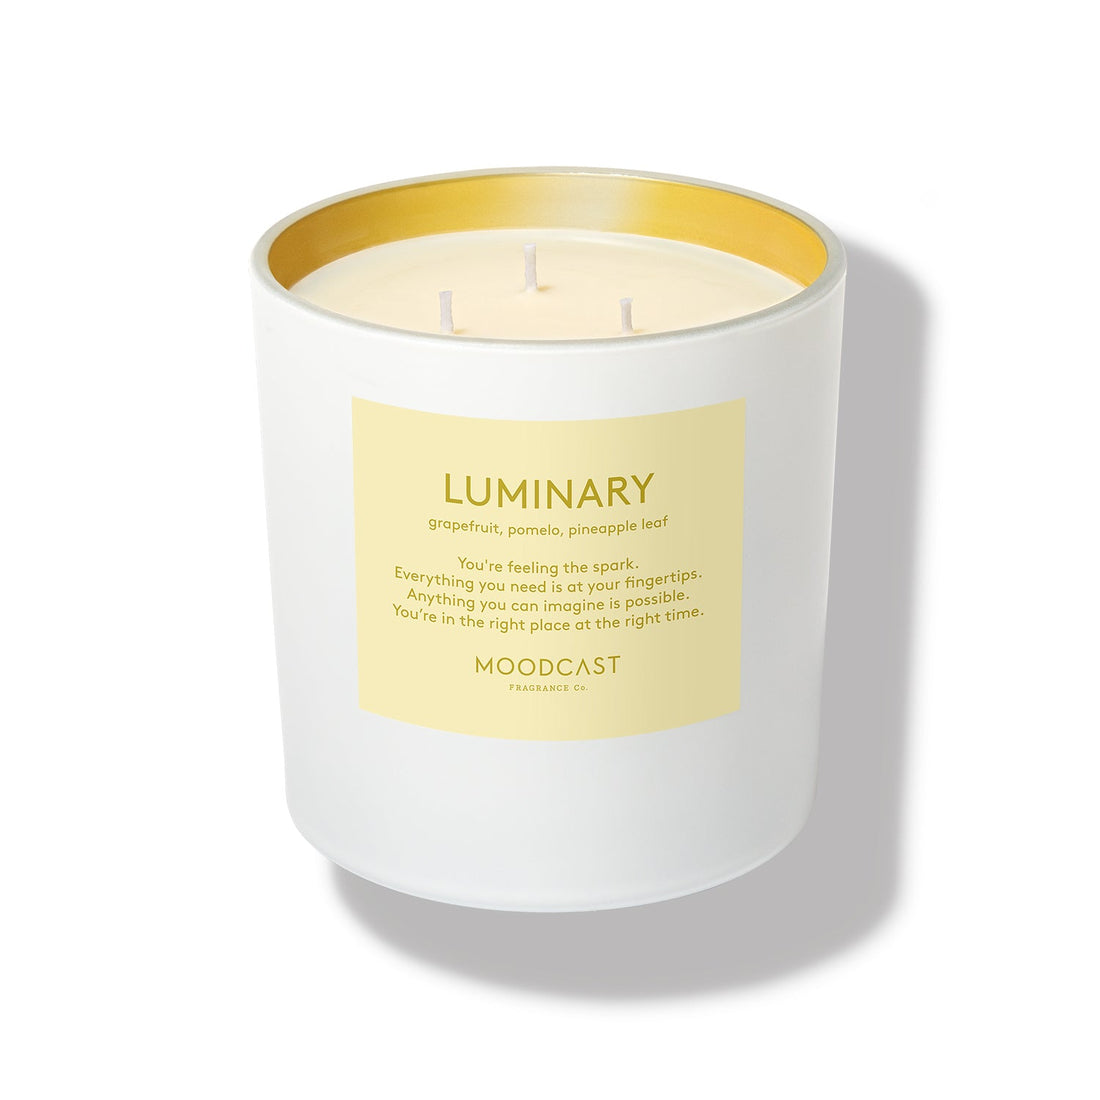 Luminary - Persona Collection (White & Gold) - 24oz/680g Coconut Wax Blend Glass Jar 3-Wick Candle - Key Notes: Grapefruit, Pomelo, Pineapple Leaf